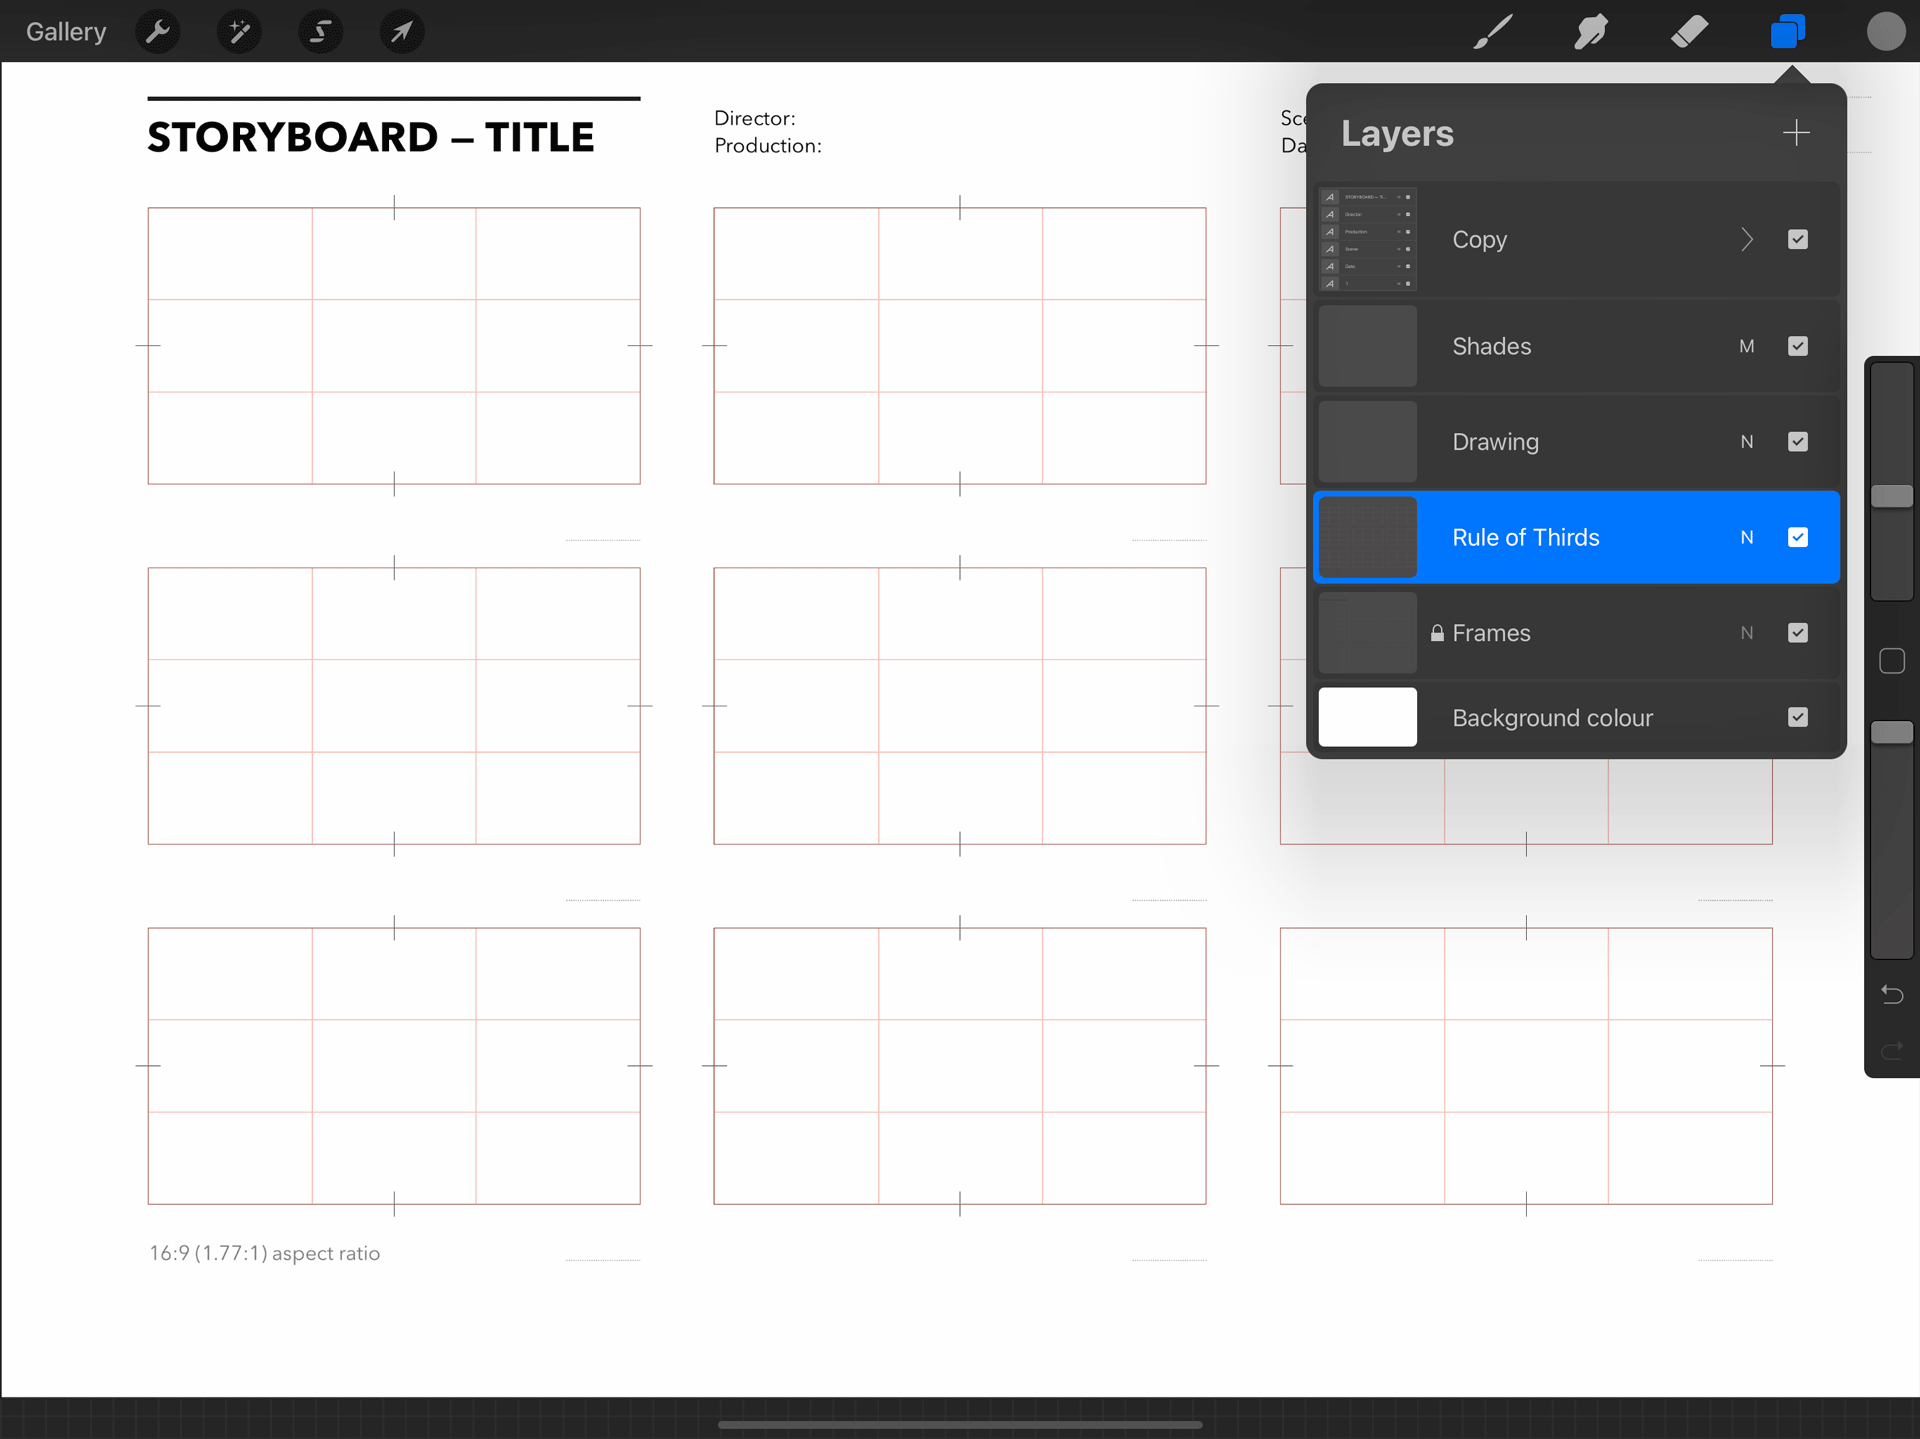 Free Procreate storyboard template, 9 frames for 169 (1.771) films